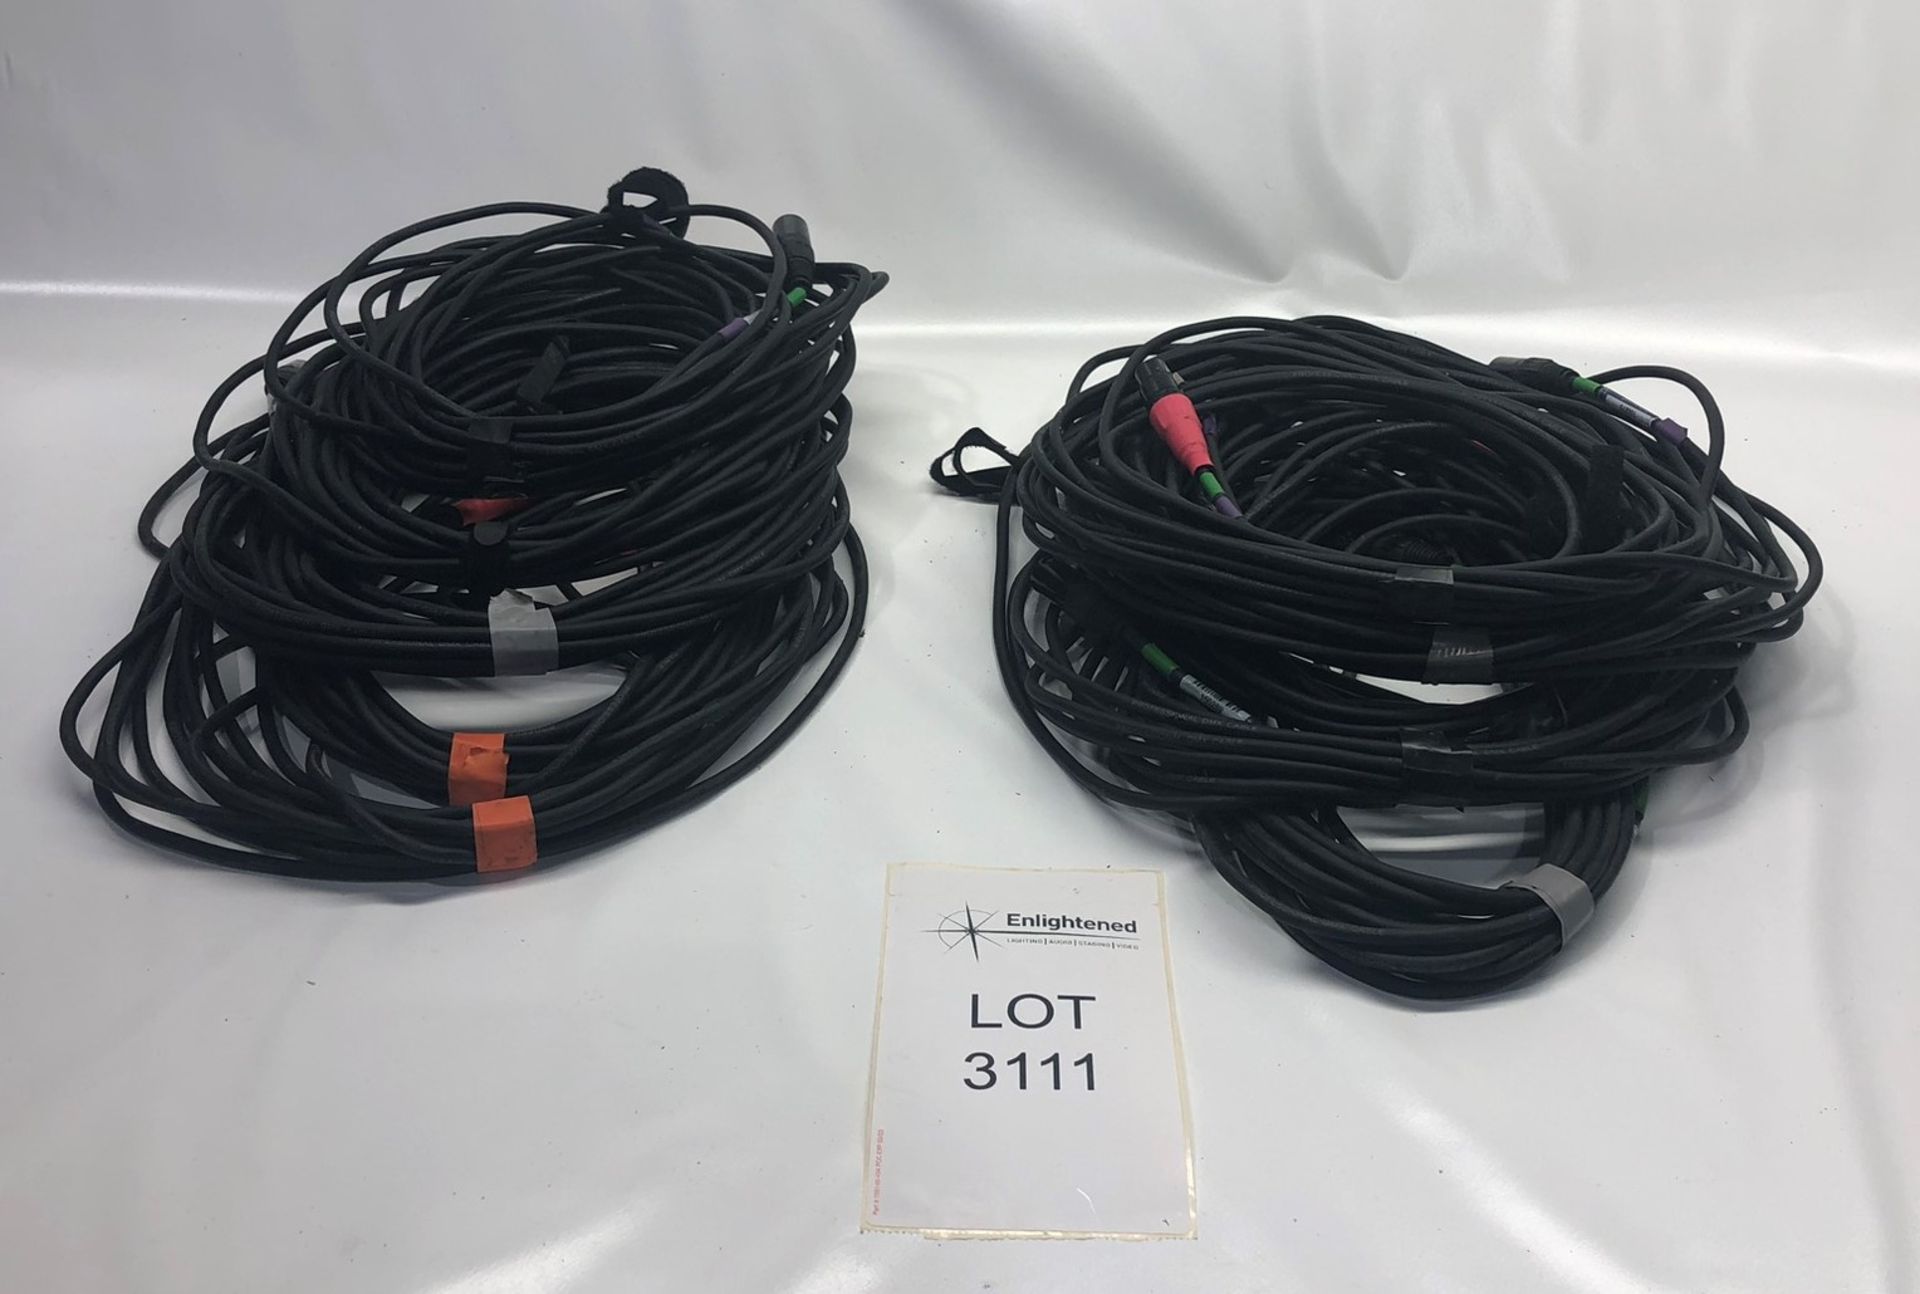 10x 10m 5pin DMX cable (not neutrik) Condition: Ex-Hire Lots located in Bristol for collection.